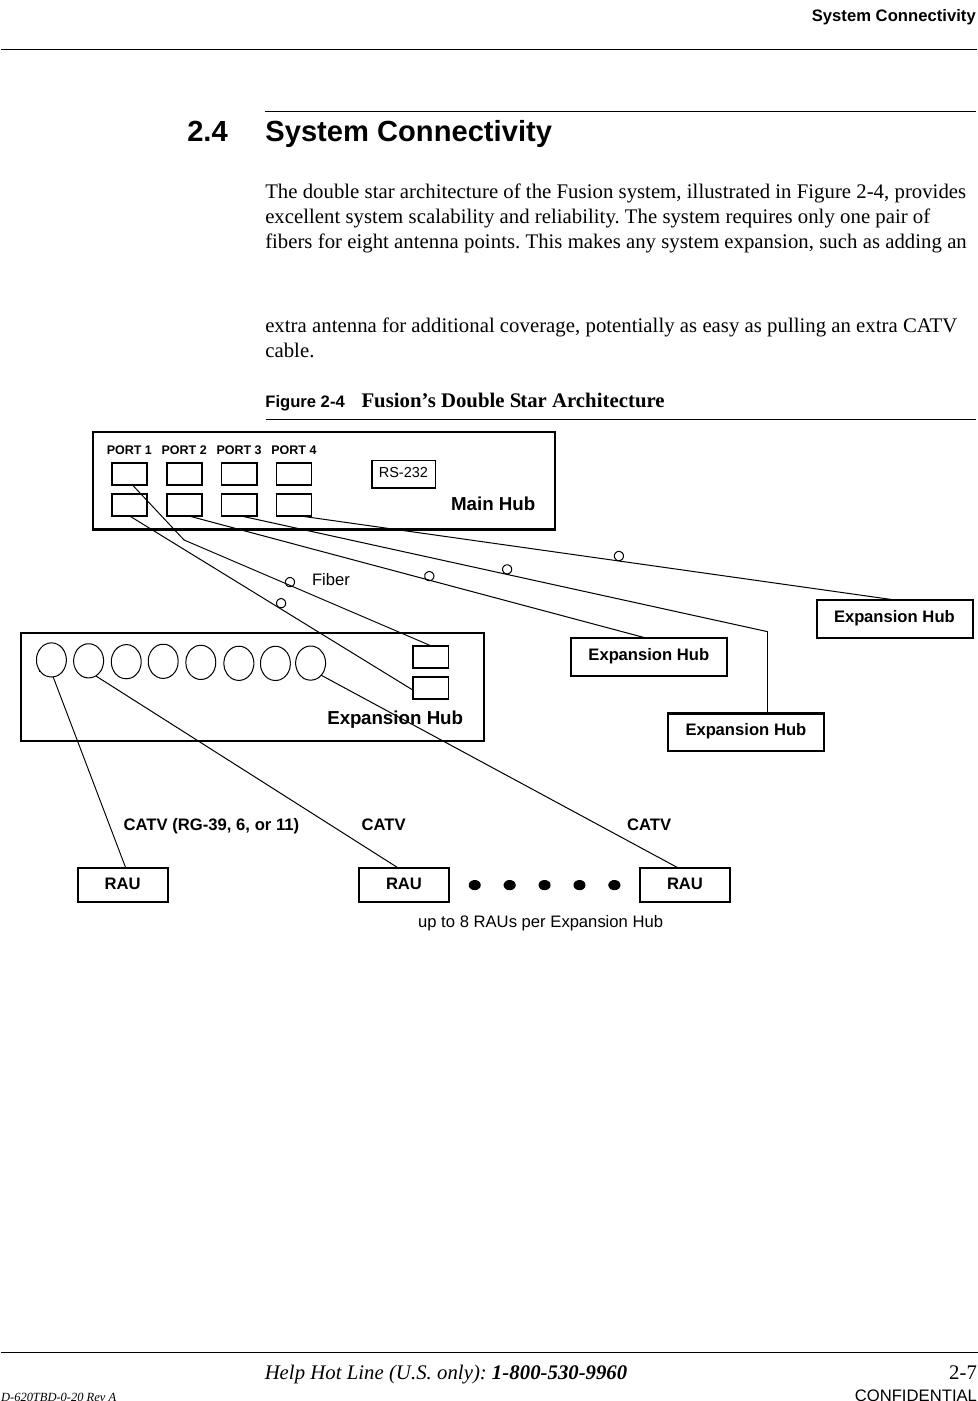 Help Hot Line (U.S. only): 1-800-530-9960 2-7D-620TBD-0-20 Rev A CONFIDENTIALSystem Connectivity2.4 System ConnectivityThe double star architecture of the Fusion system, illustrated in Figure 2-4, provides excellent system scalability and reliability. The system requires only one pair of fibers for eight antenna points. This makes any system expansion, such as adding an extra antenna for additional coverage, potentially as easy as pulling an extra CATV cable.Figure 2-4 Fusion’s Double Star ArchitectureMain HubRS-232PORT 1 PORT 2 PORT 3 PORT 4Expansion Hub Expansion HubFiberExpansion HubExpansion HubCATVCATV (RG-39, 6, or 11) CATVup to 8 RAUs per Expansion HubRAU RAU RAU